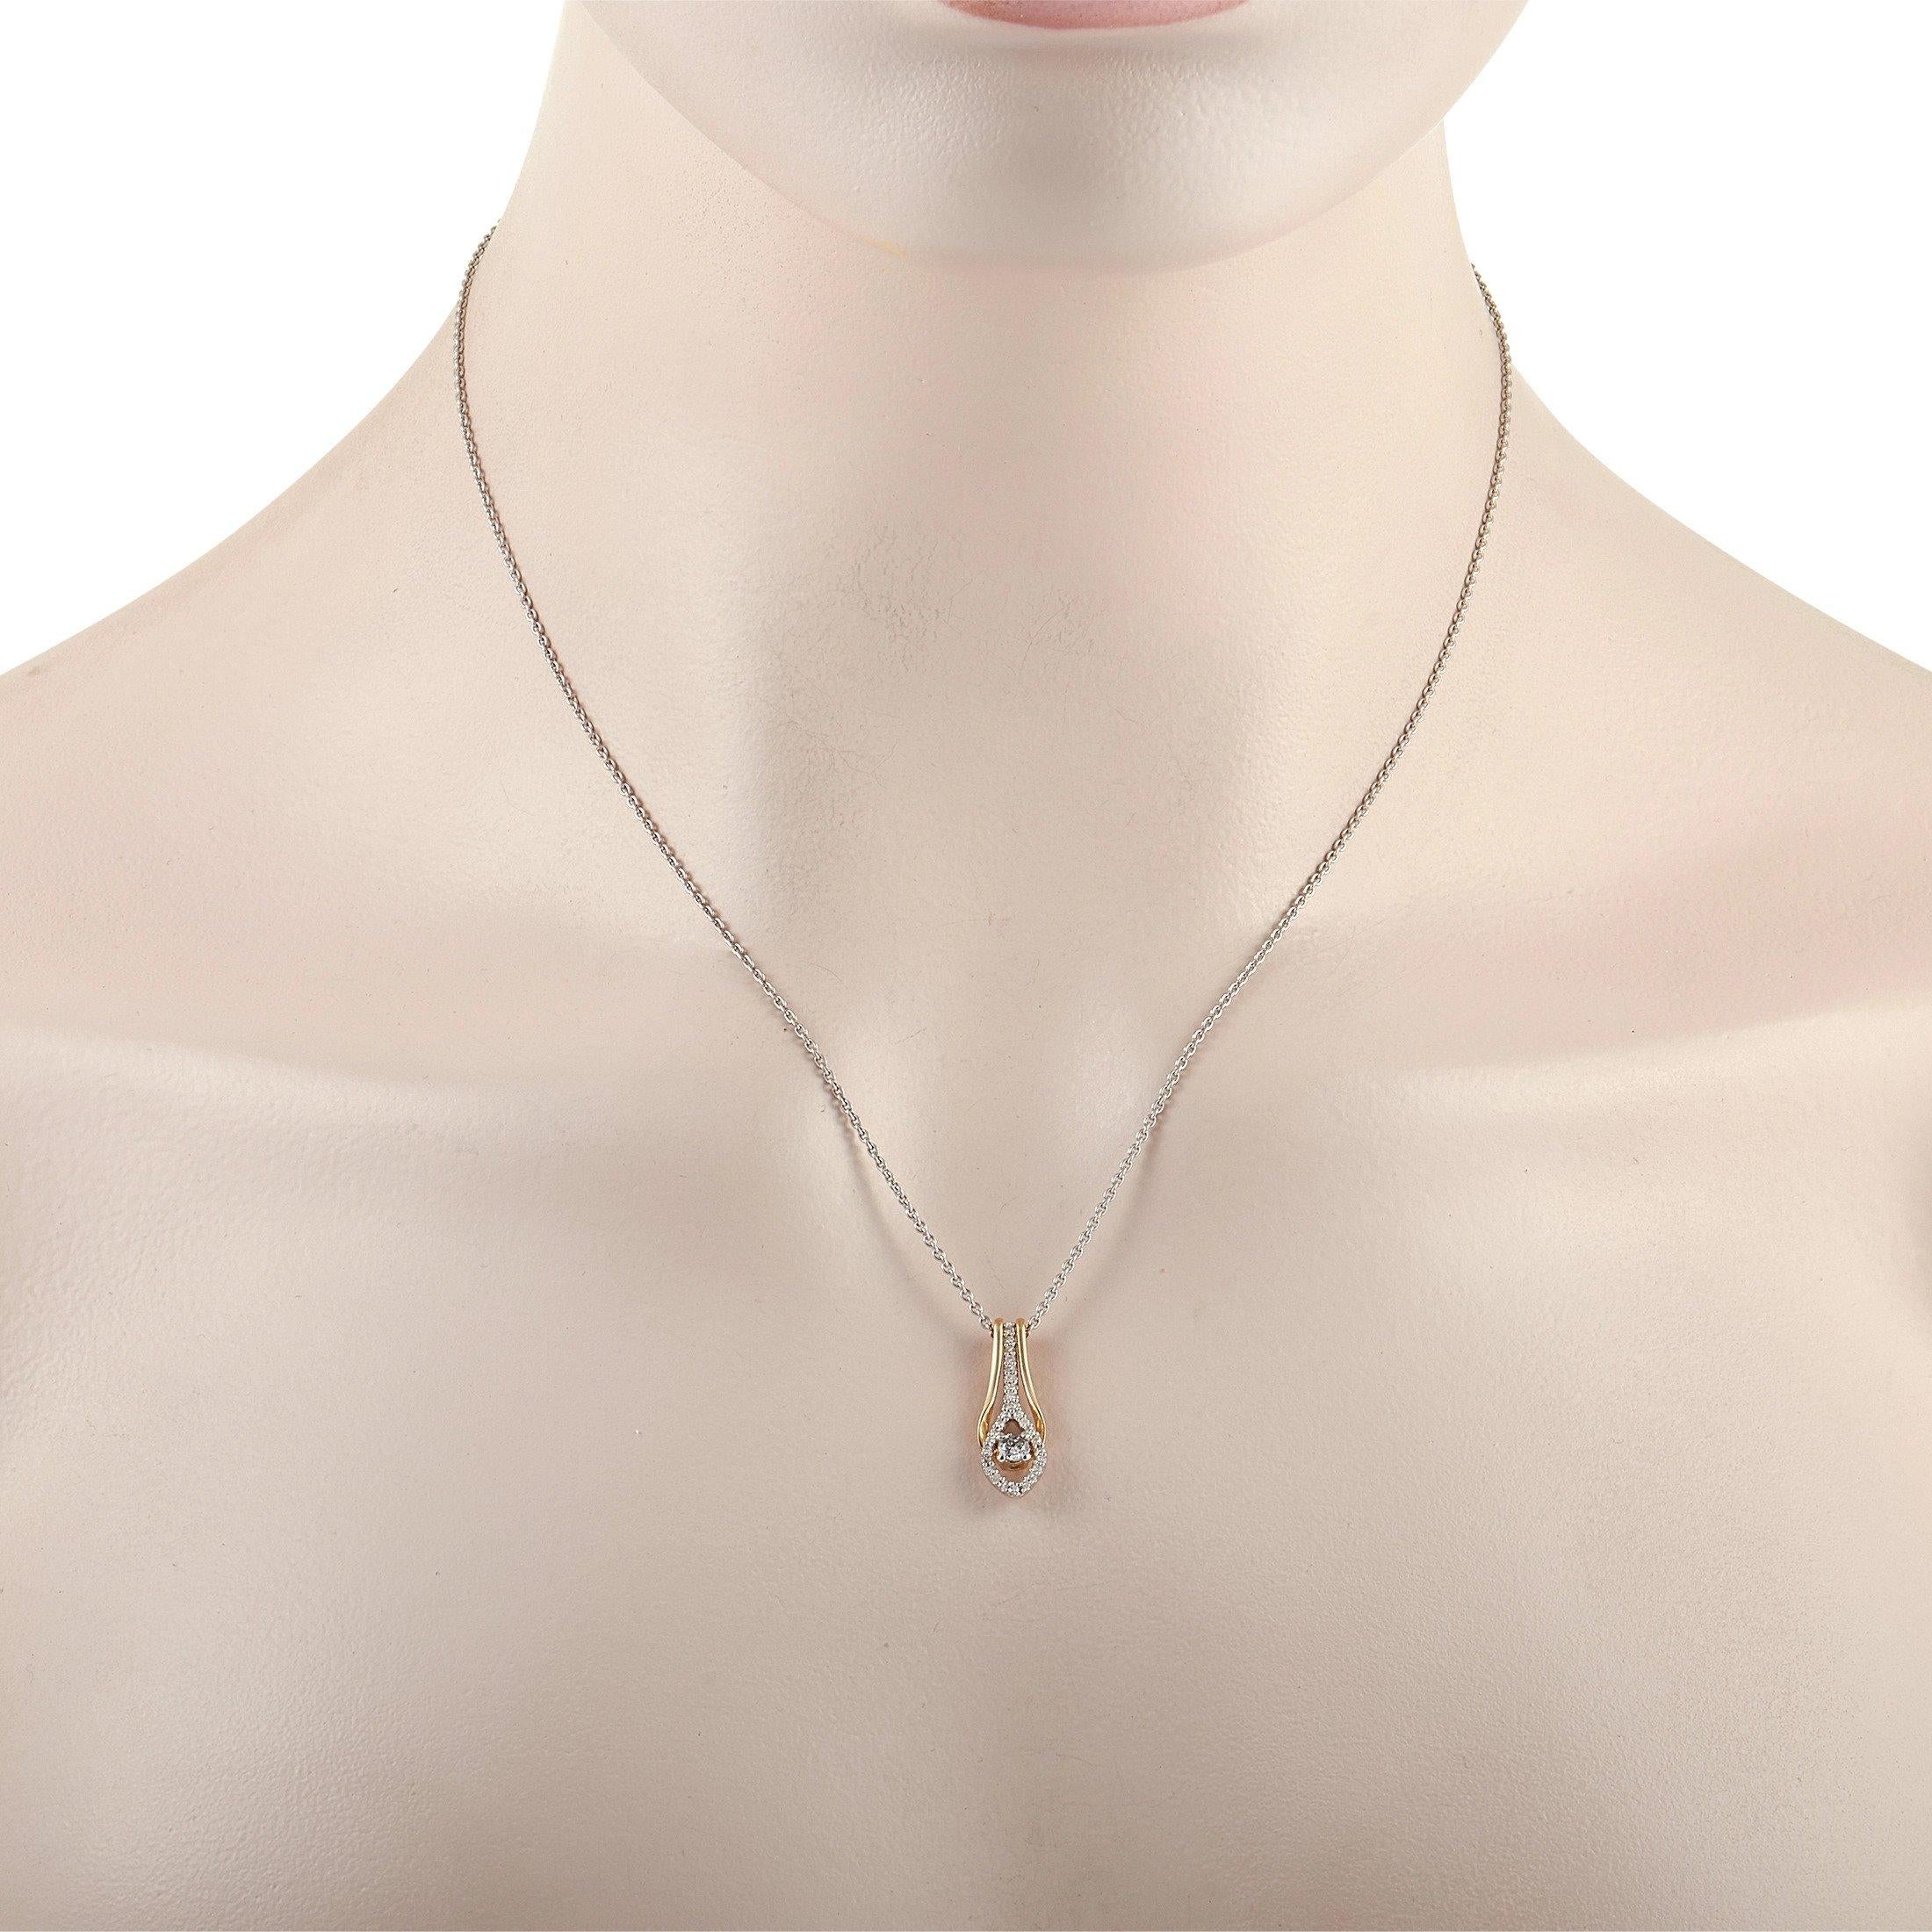 A unique pairing of metals and a dynamic design make this pendant necklace simple exquisite. The central diamond and smaller diamonds sitting within a 10K White Gold setting possess a total weight of 0.25 carats, all which is accented by a sleek 10K